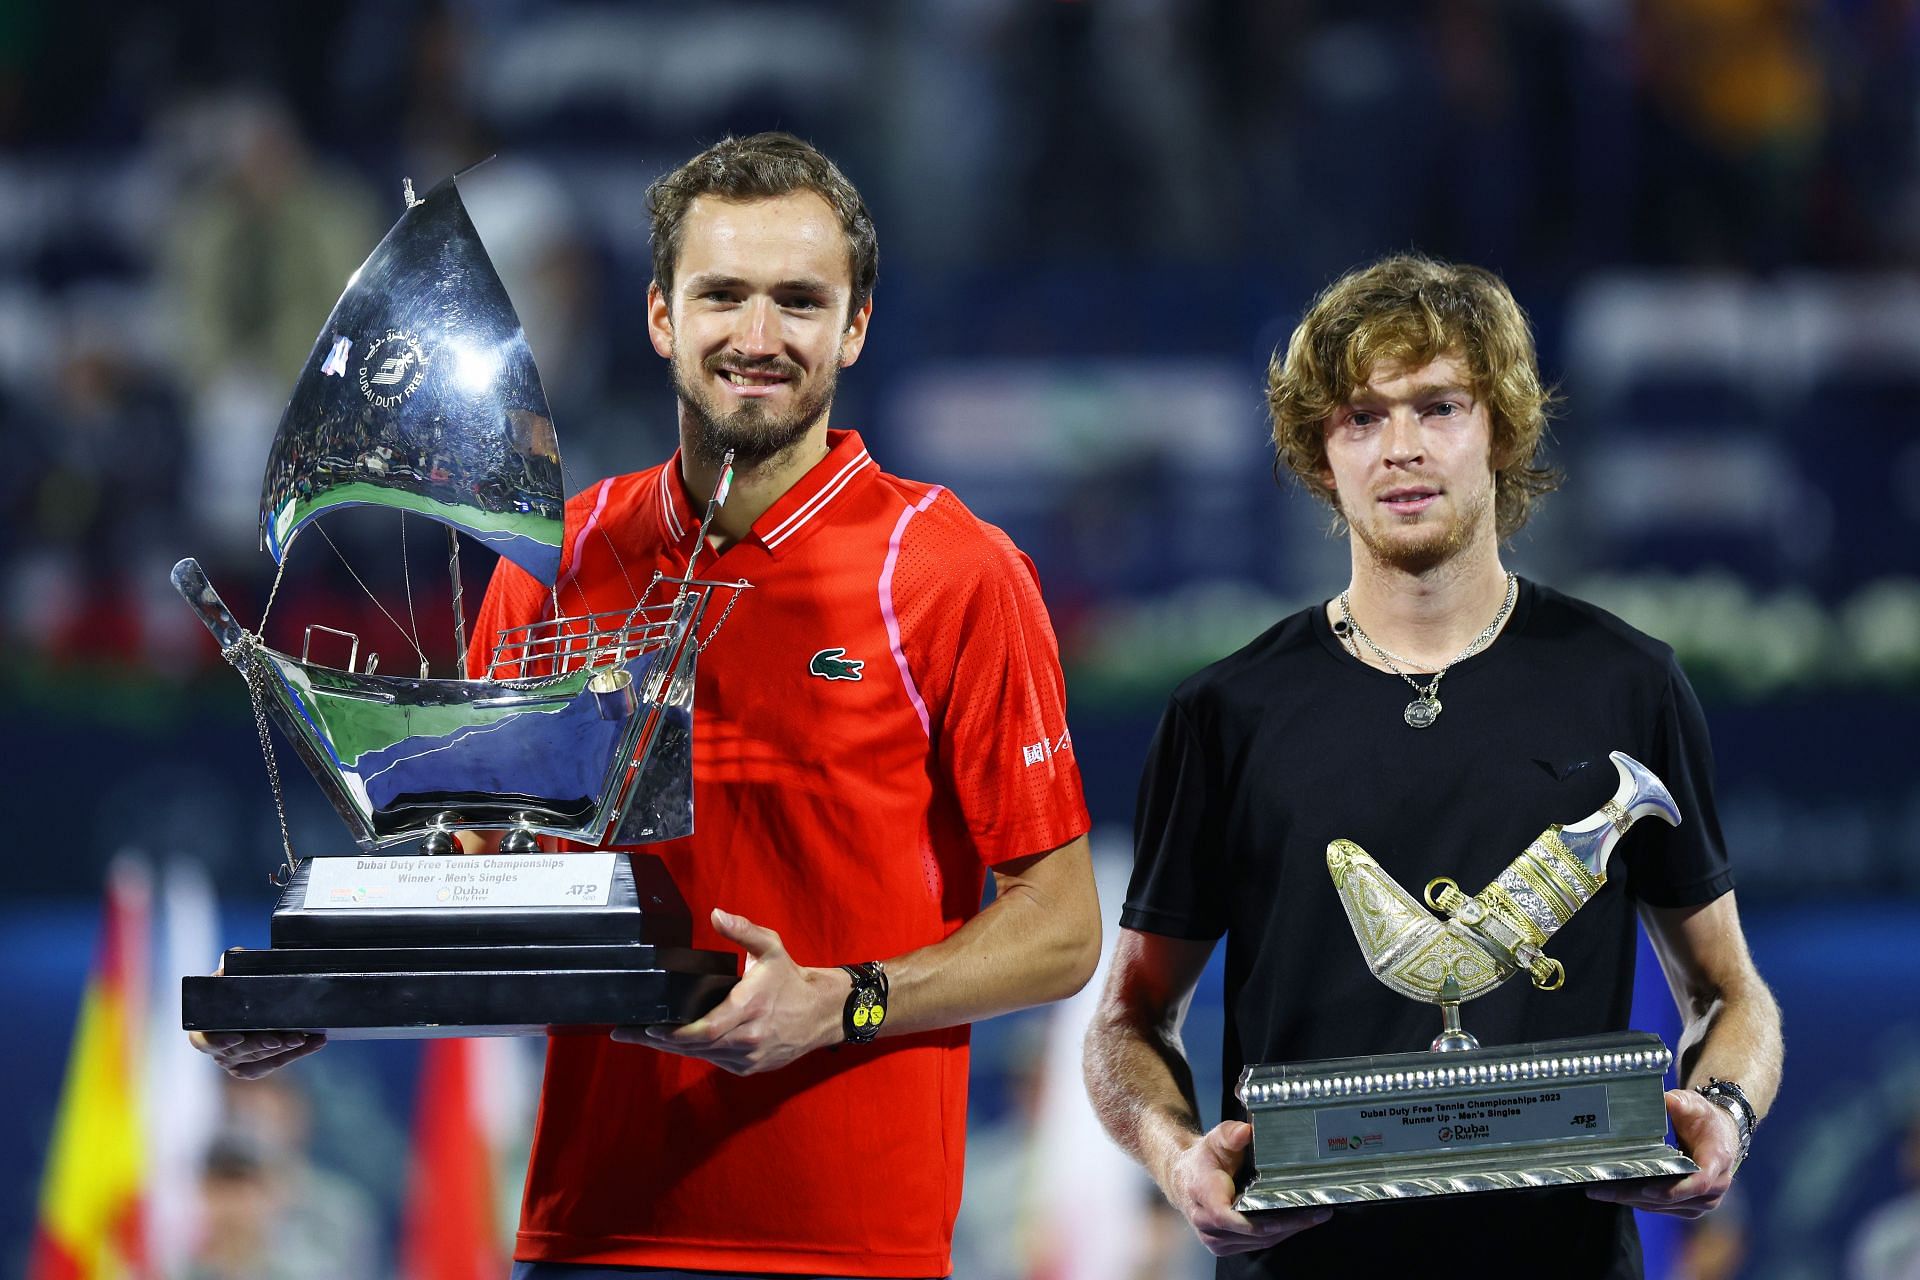 Daniil Medvedev and Andrey Rublev at the Dubai Tennis Championships